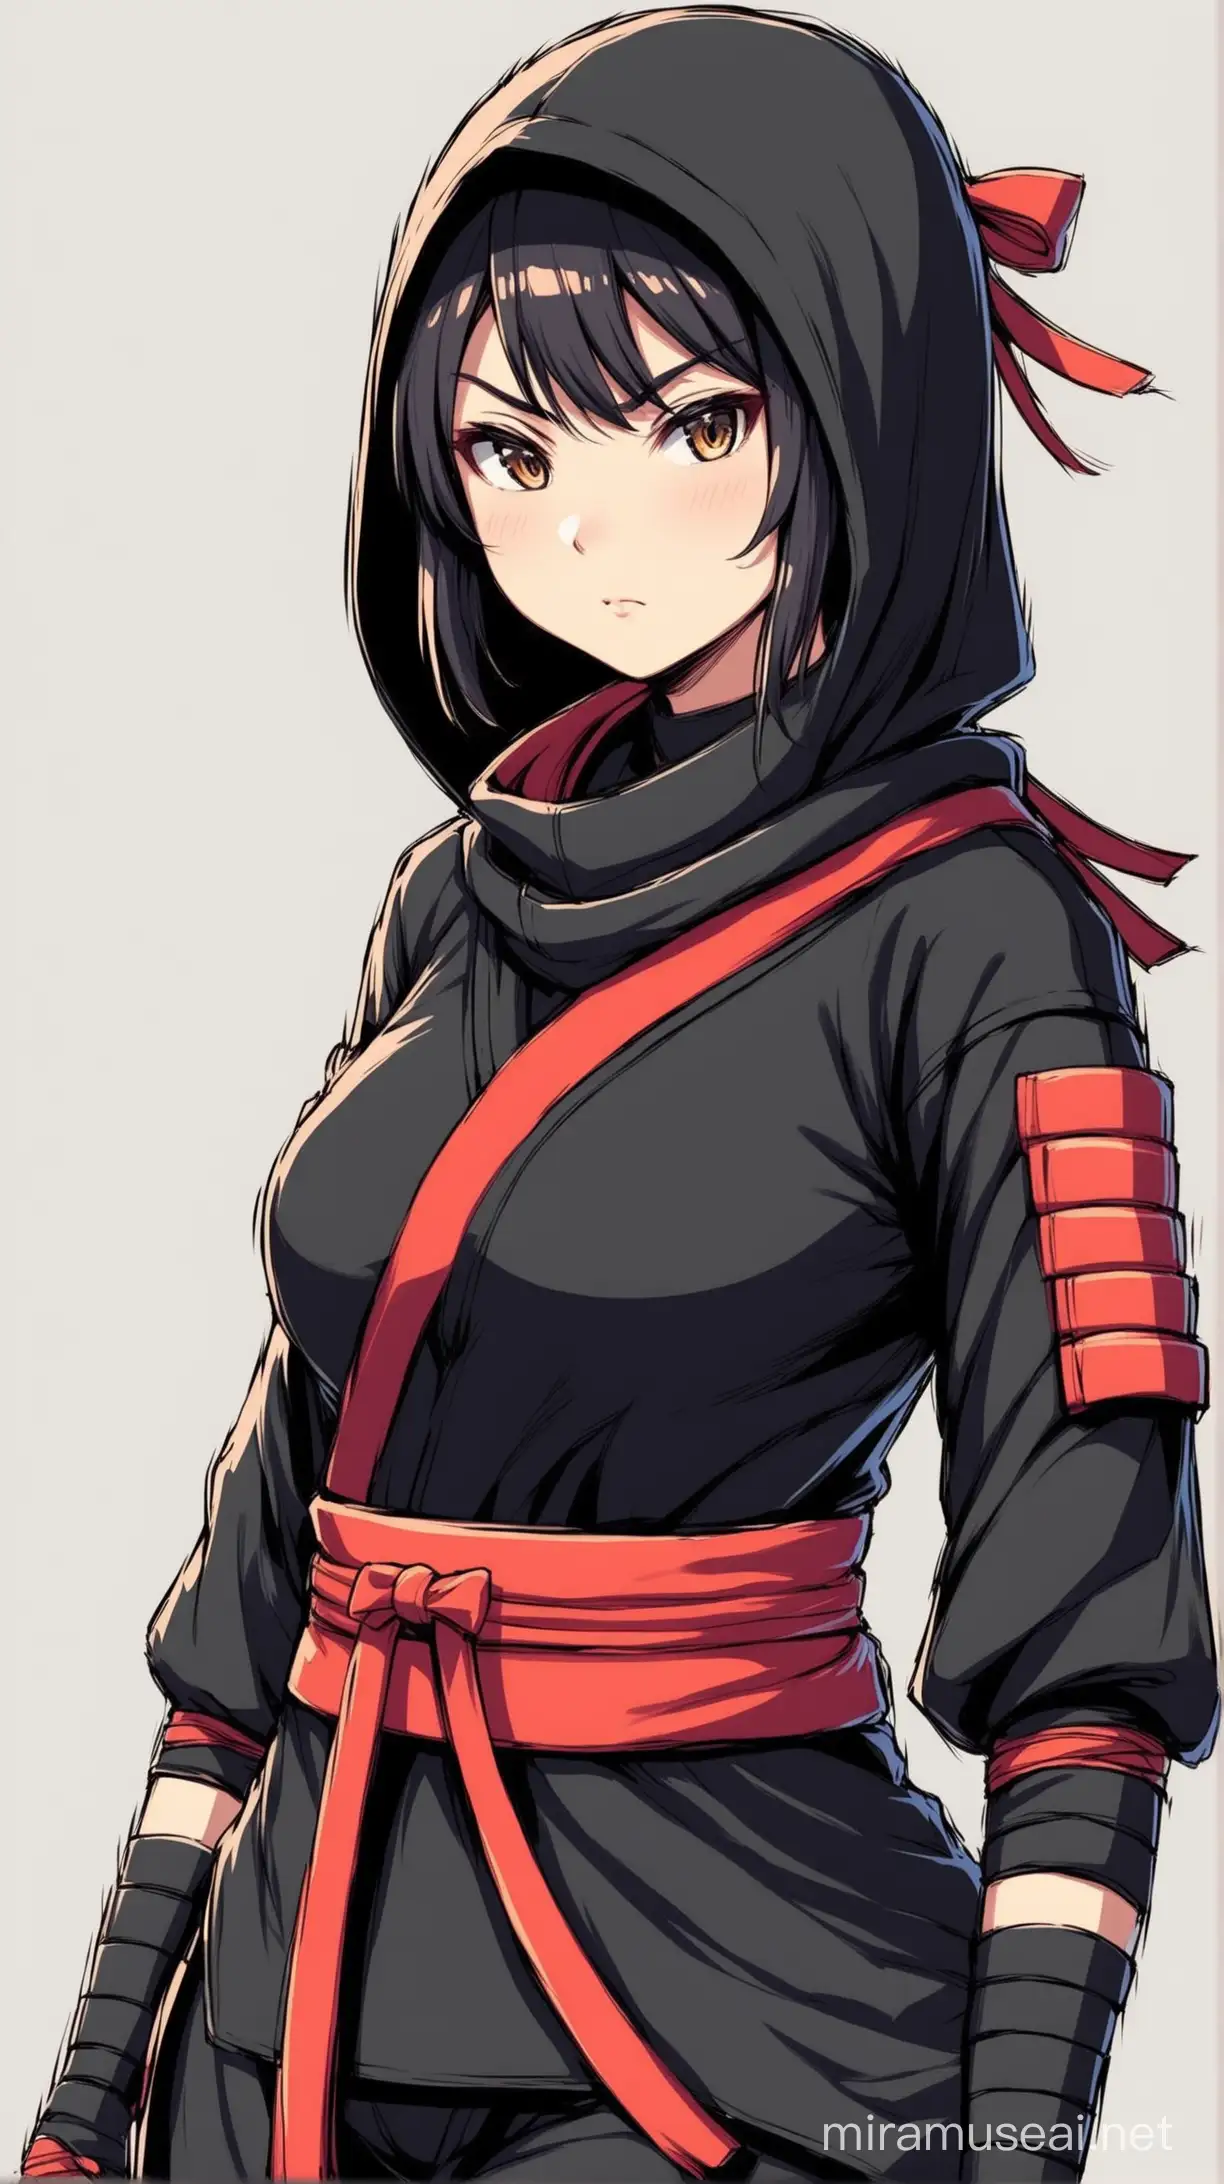 Stealthy Ninja Girl in Traditional Outfit